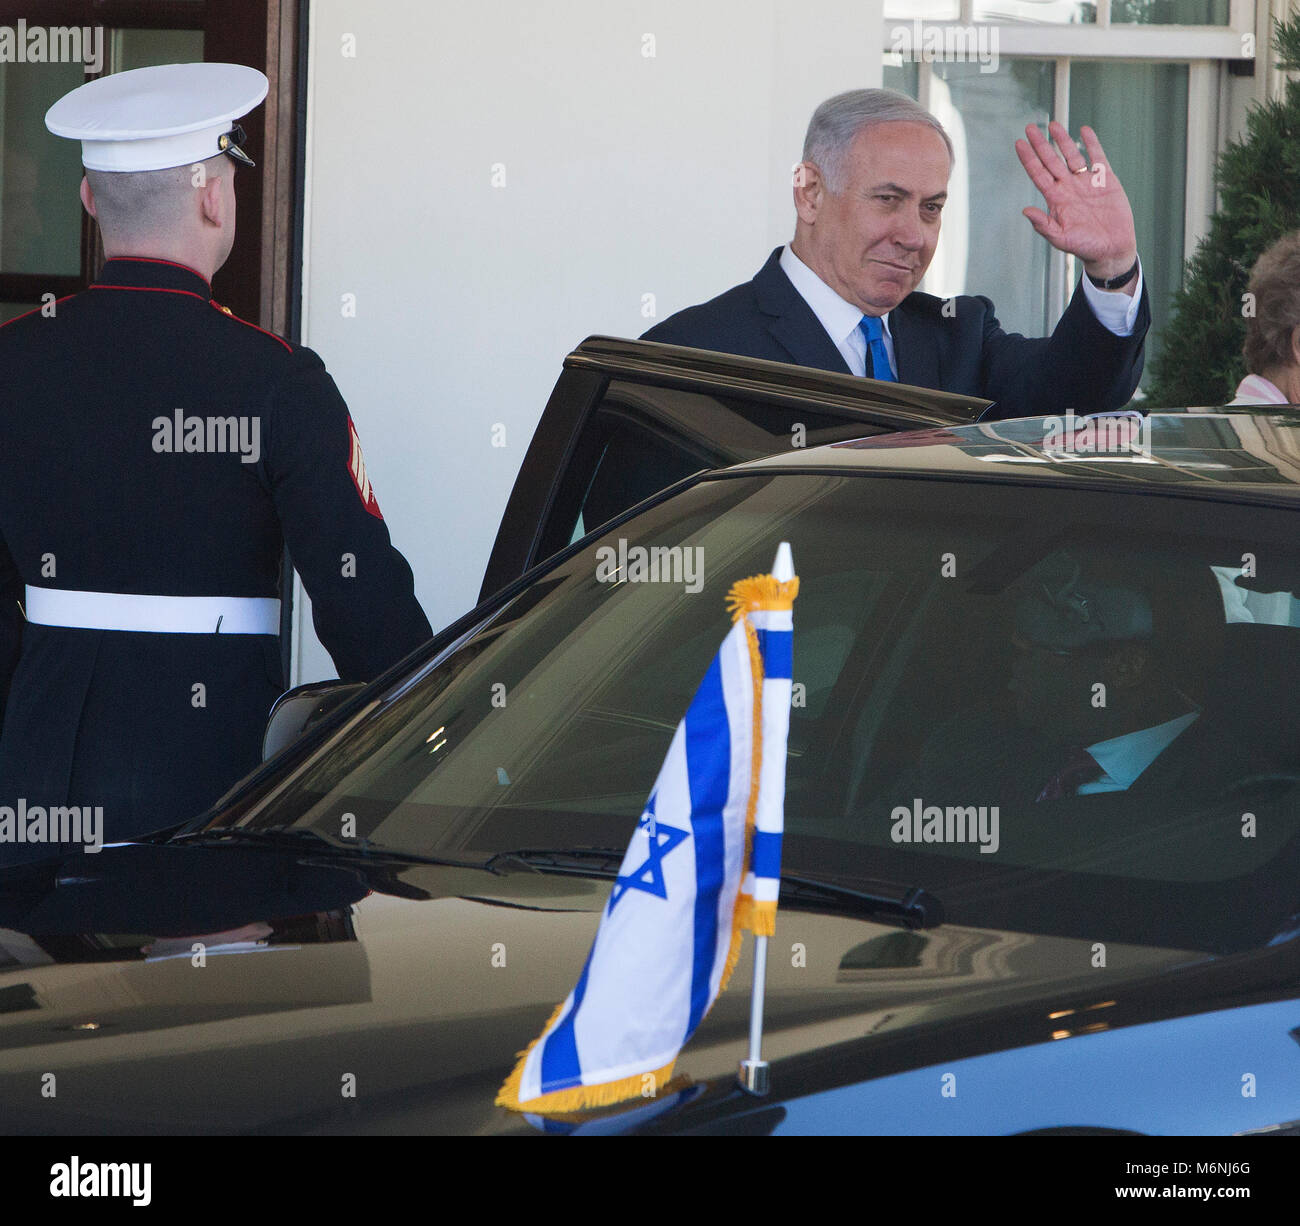 Israel's Prime Minister Benjamin Netanyahu departs from The White House in Washington, DC, March 5, 2018 after holding meeting with U.S. President Trump. Credit: Chris Kleponis / CNP /MediaPunch Stock Photo